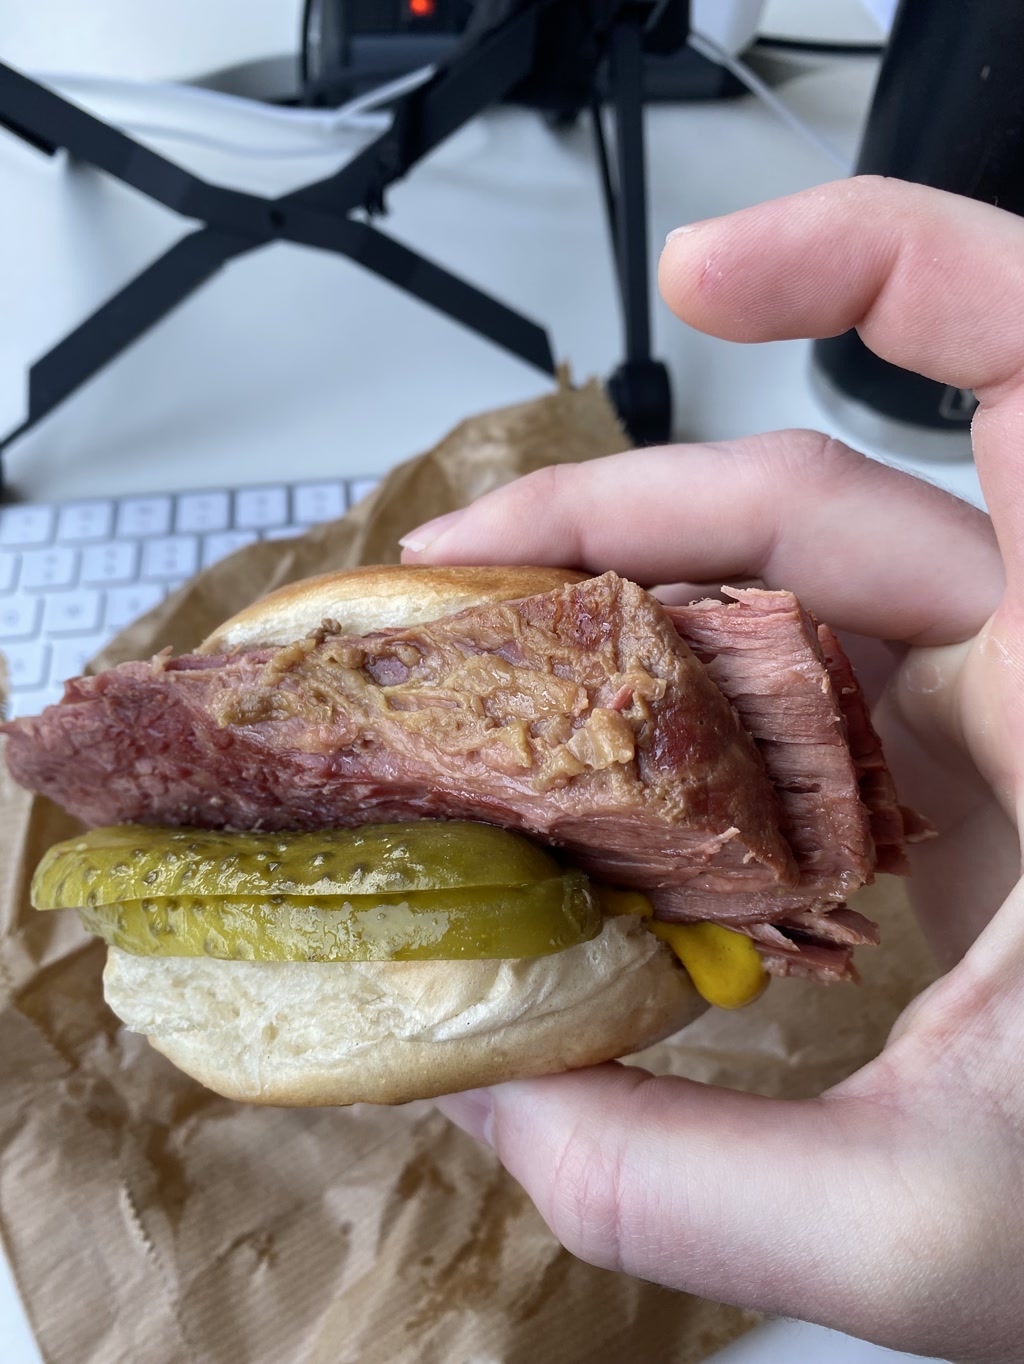 A hand is holding a sandwich consisting of a large slice of brisket and a single pickle on a white bun. The brisket appears well-cooked with a juicy texture, and the pickle is bright green indicating a pickled cucumber. The setting is an office environment with a computer keyboard, a paper bag, and part of a tripod stand visible in the background.